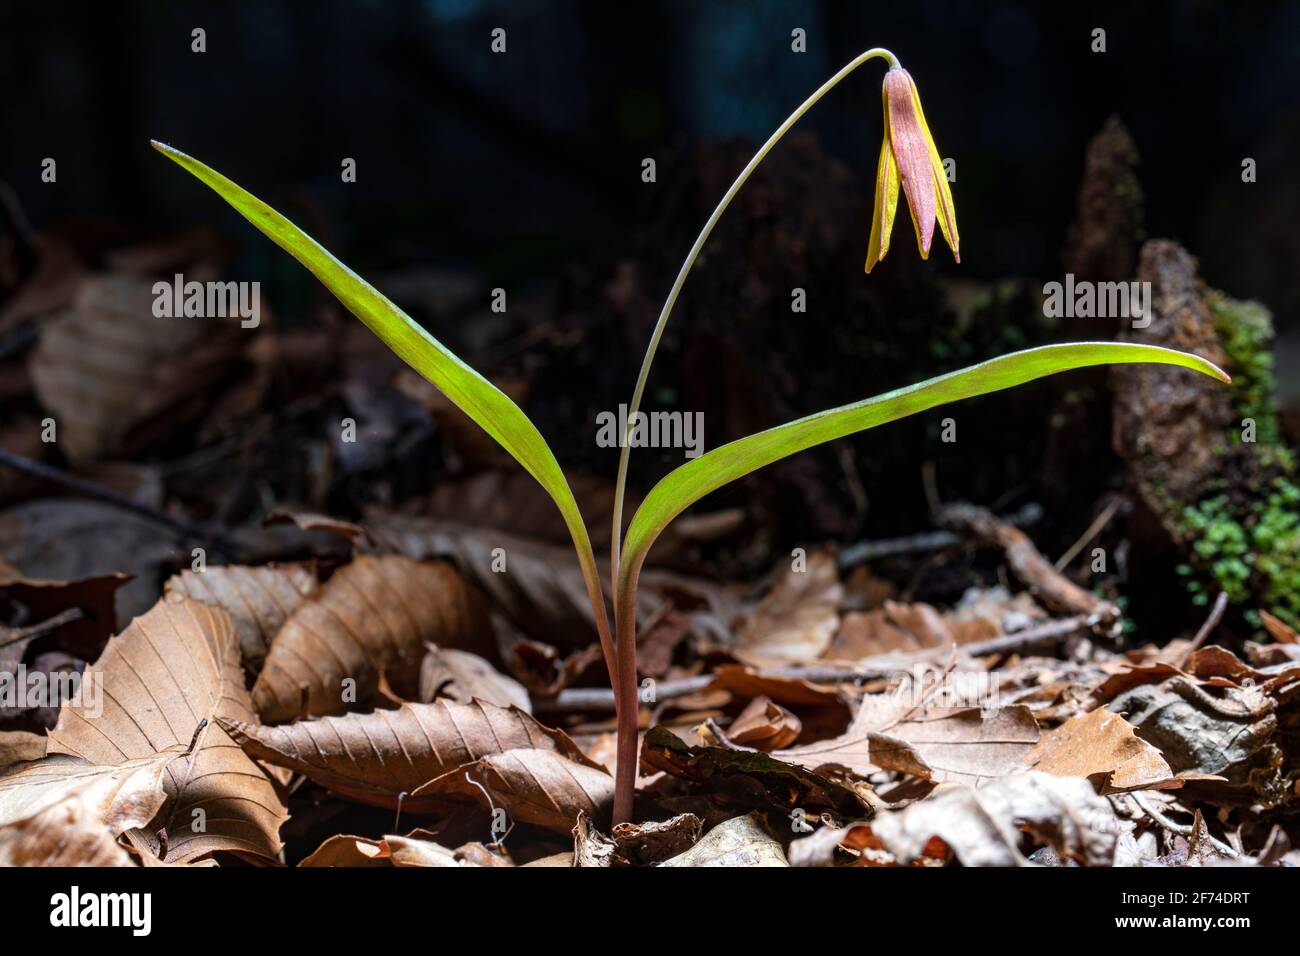 Lone Trout Lily (Dimpled Trout Lily) (Erythronium umbilicatum) - Holmes Educational State Forest, Hendersonville, North Carolina, USA Stock Photo